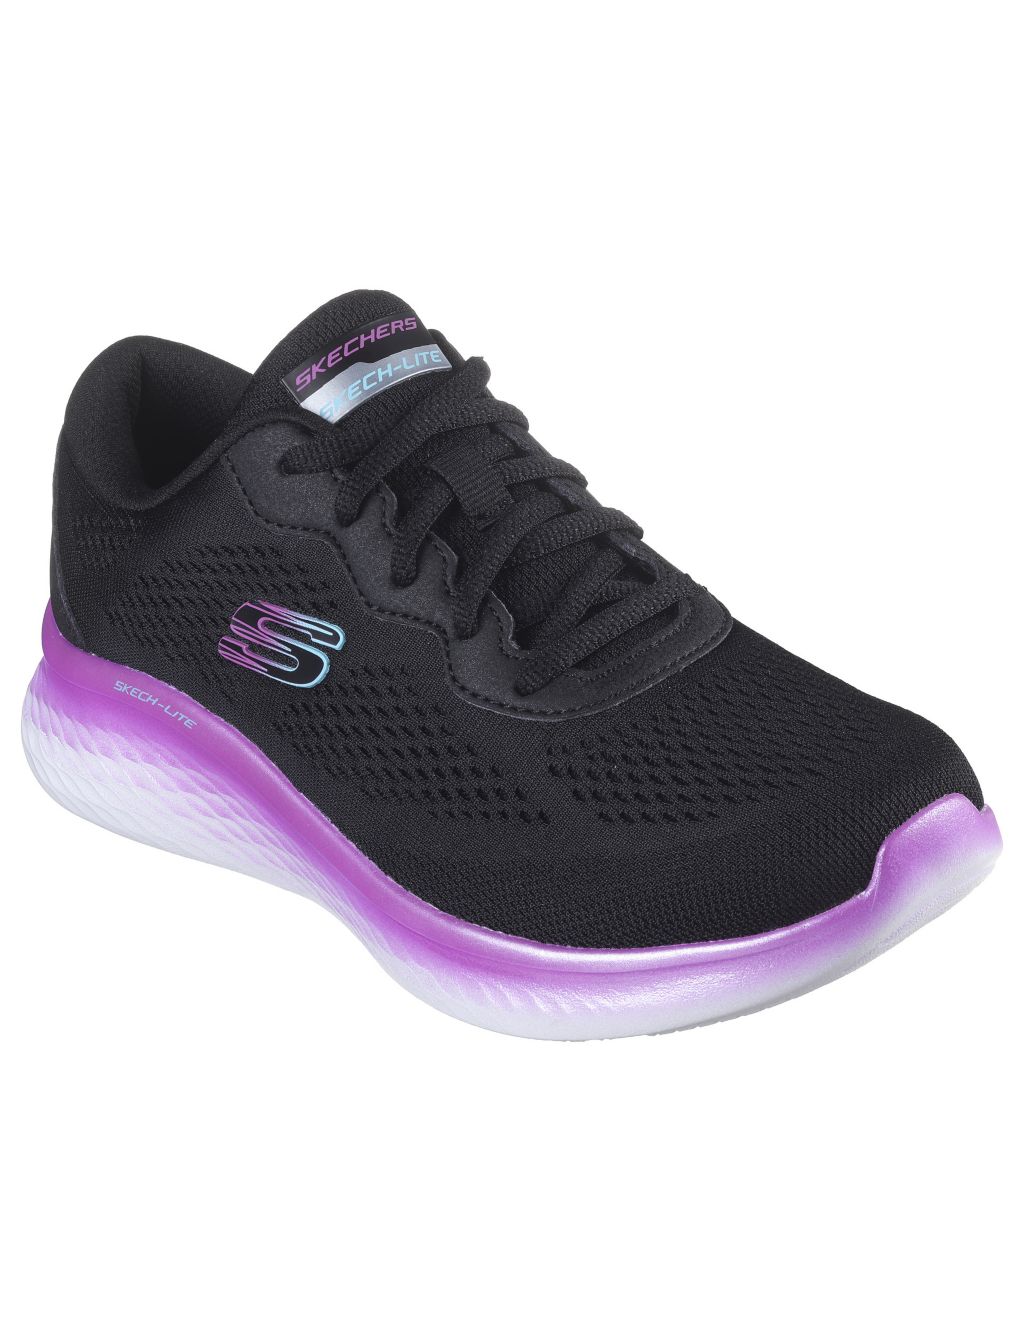 Skech-Lite Pro Stunning Steps Trainers image 2